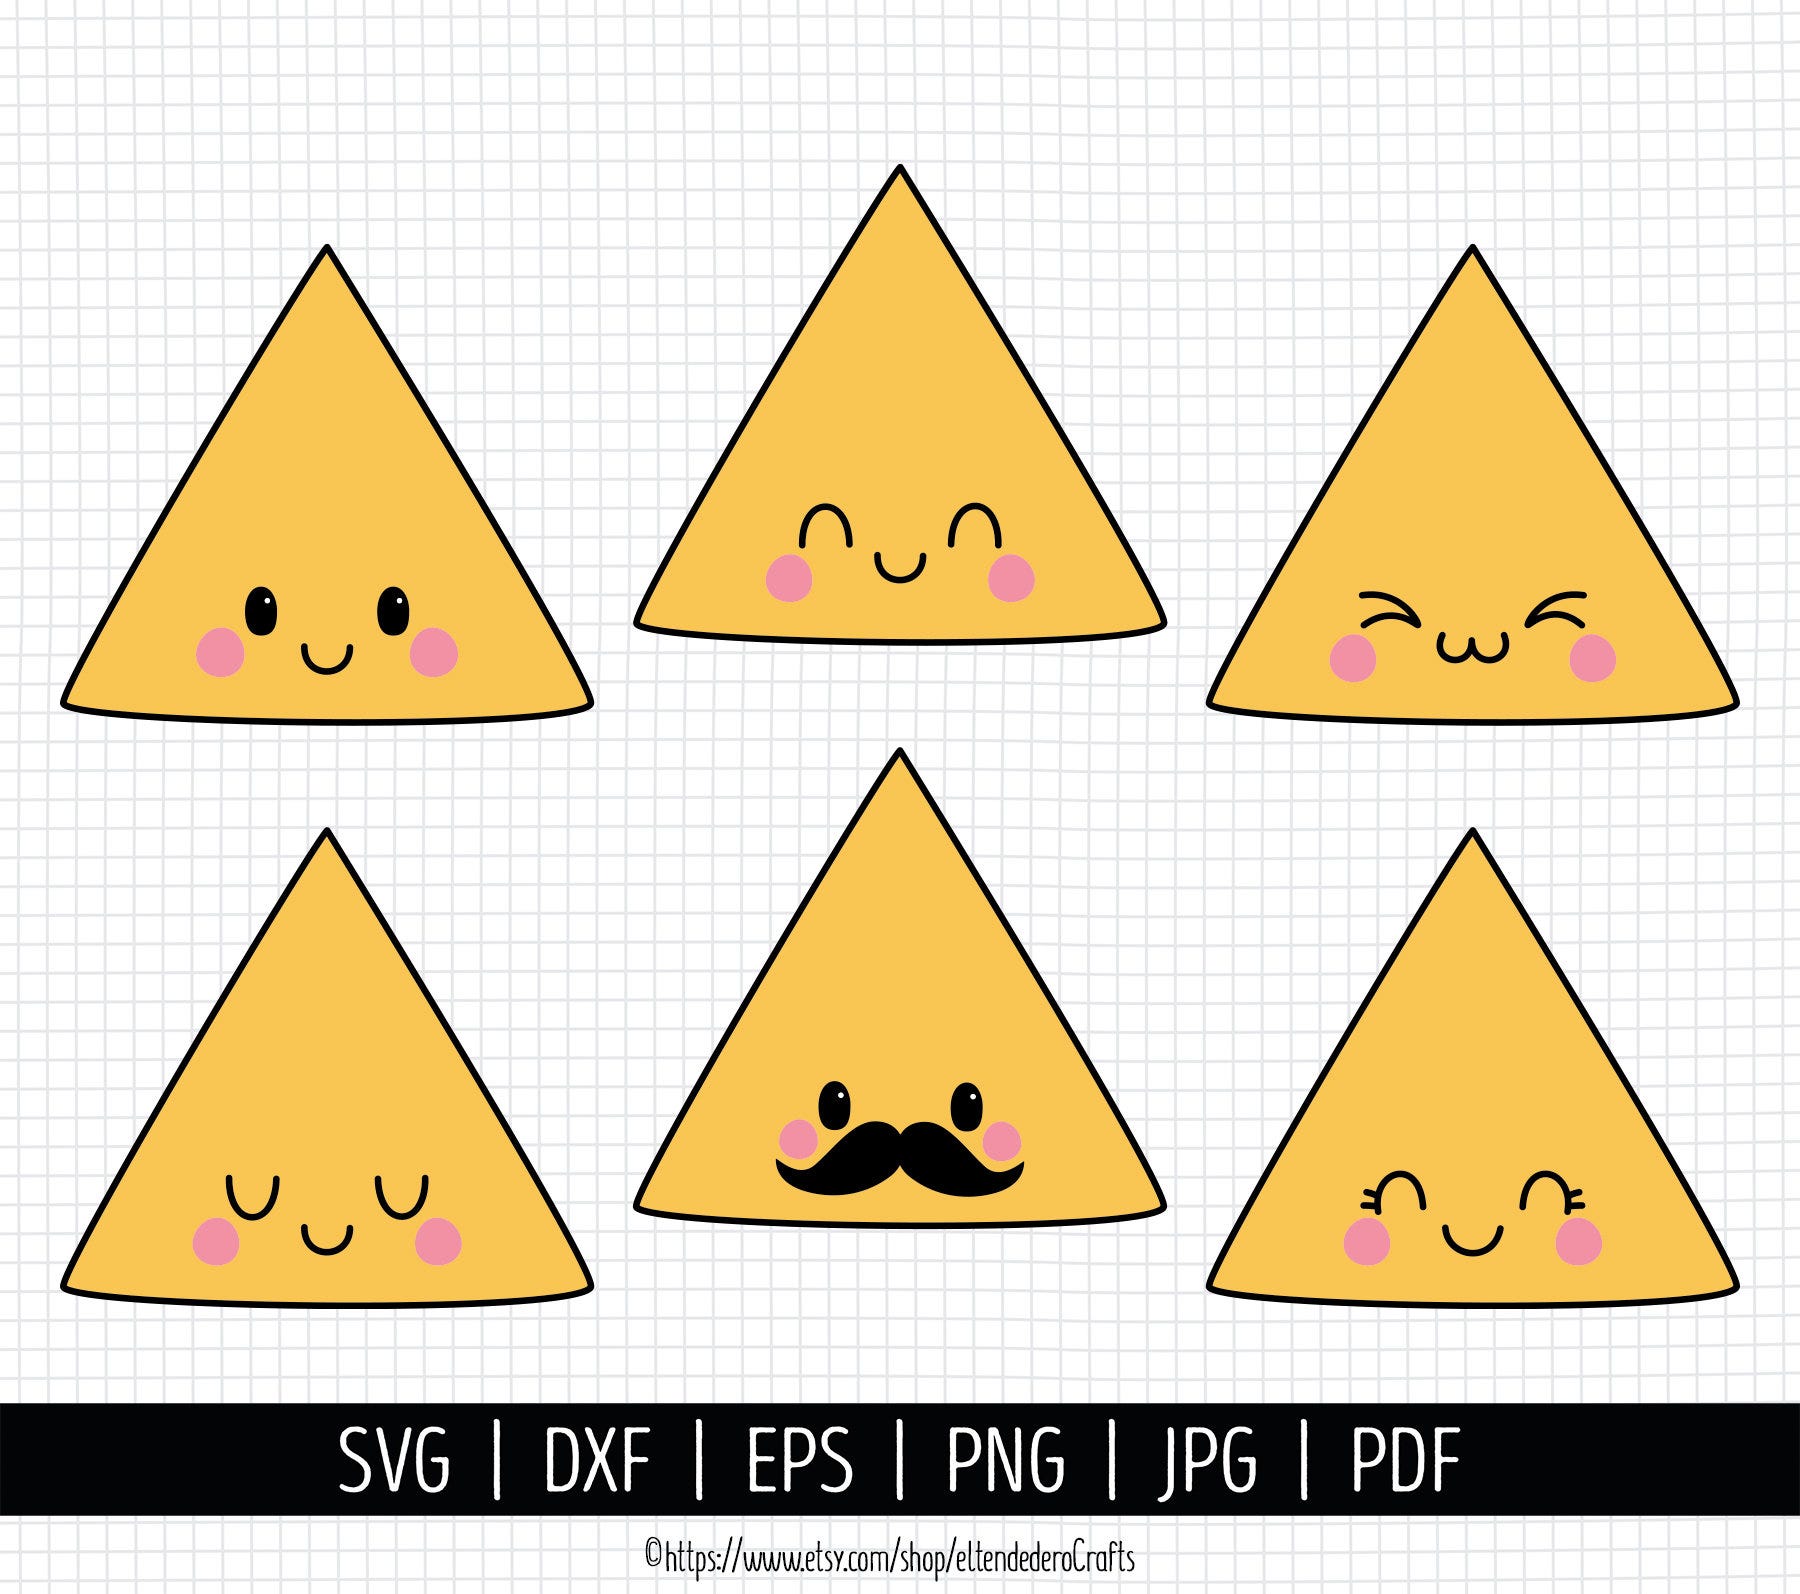 Nacho SVG. Cinco de Mayo Cut Files. Mexican Food SVG, Kawaii Nacho with Mustache PNG Clipart. Cute Face Shirt Vector for Cutting Machine